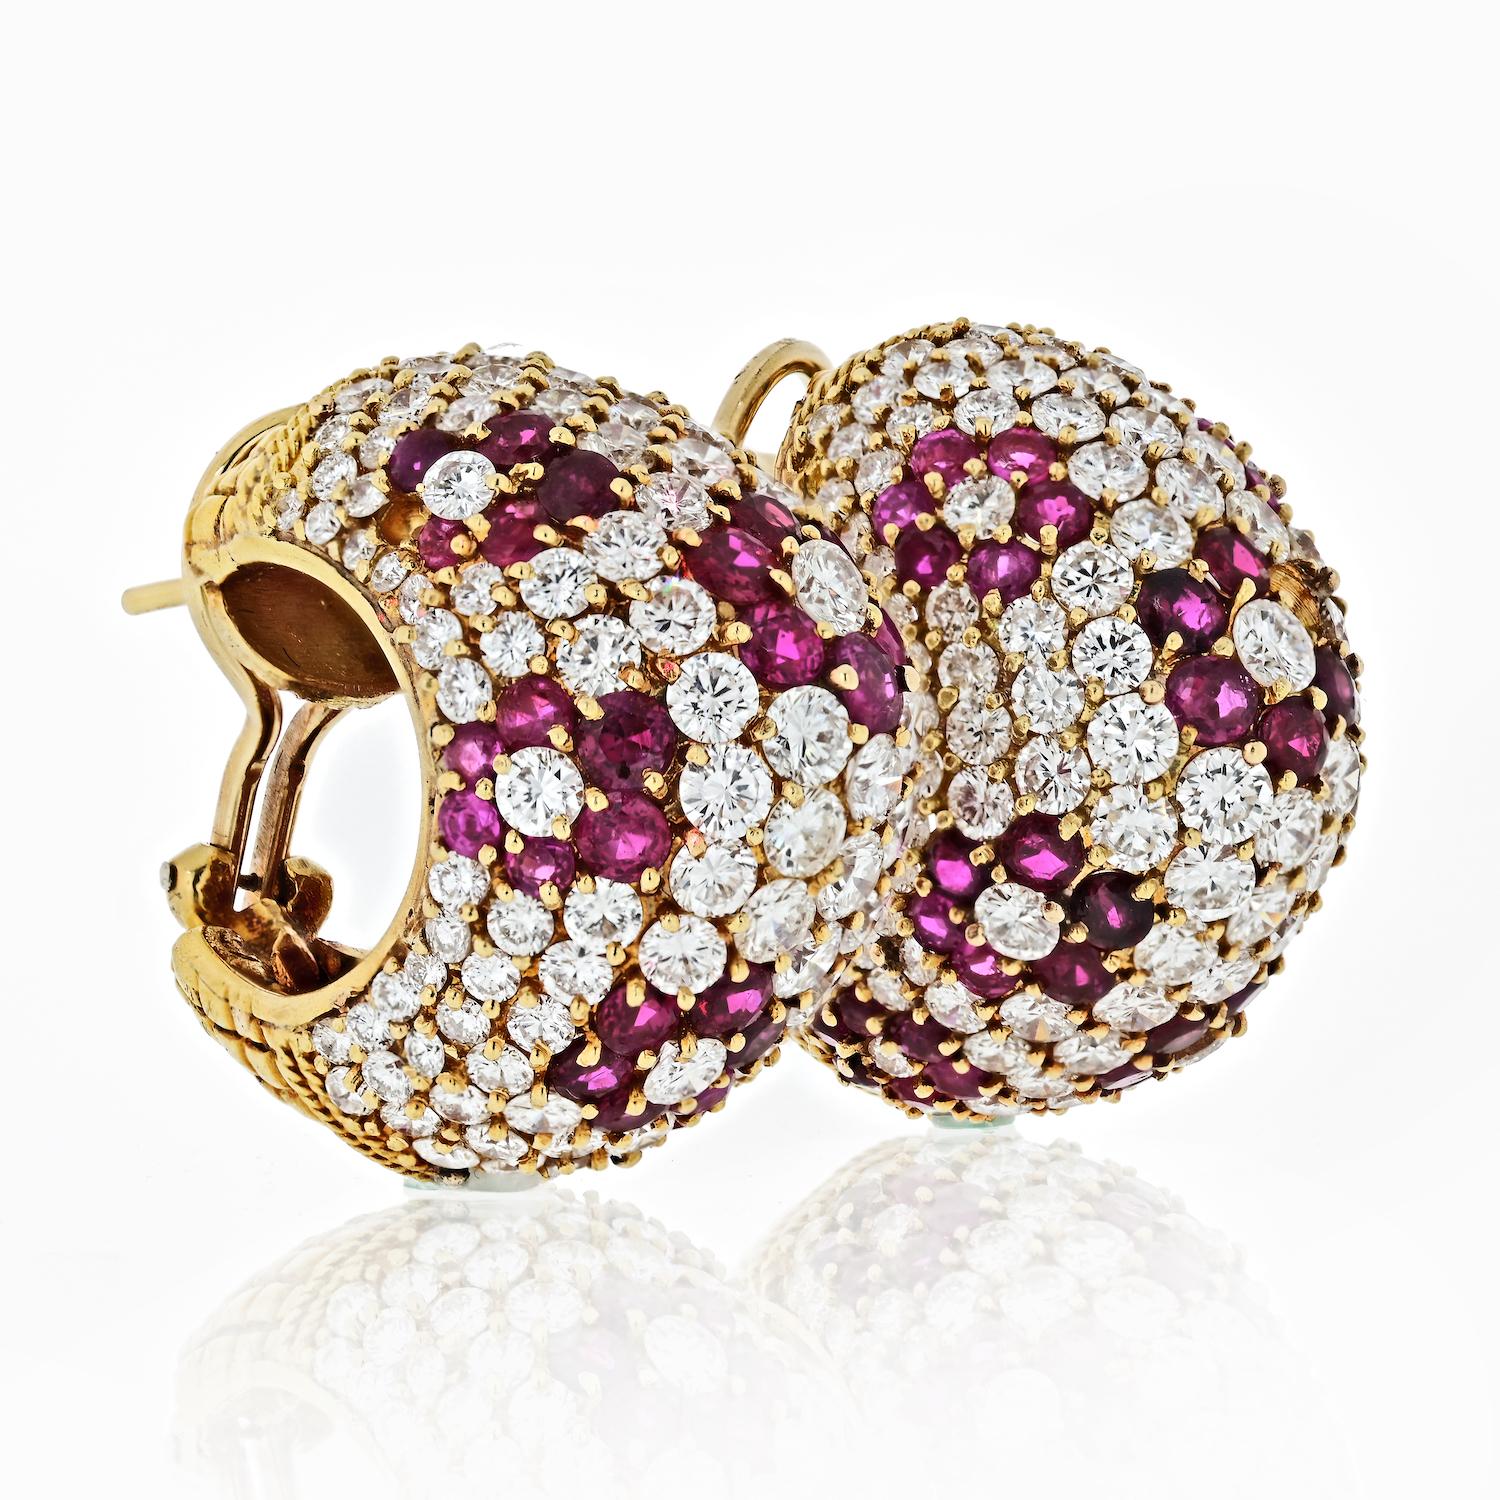 Diamond and ruby yellow gold pave hoop earrings with micro set rubies and diamonds throughout totaling approx. 15 carats. Crafted in 18K Yellow gold. For pierced ears. 